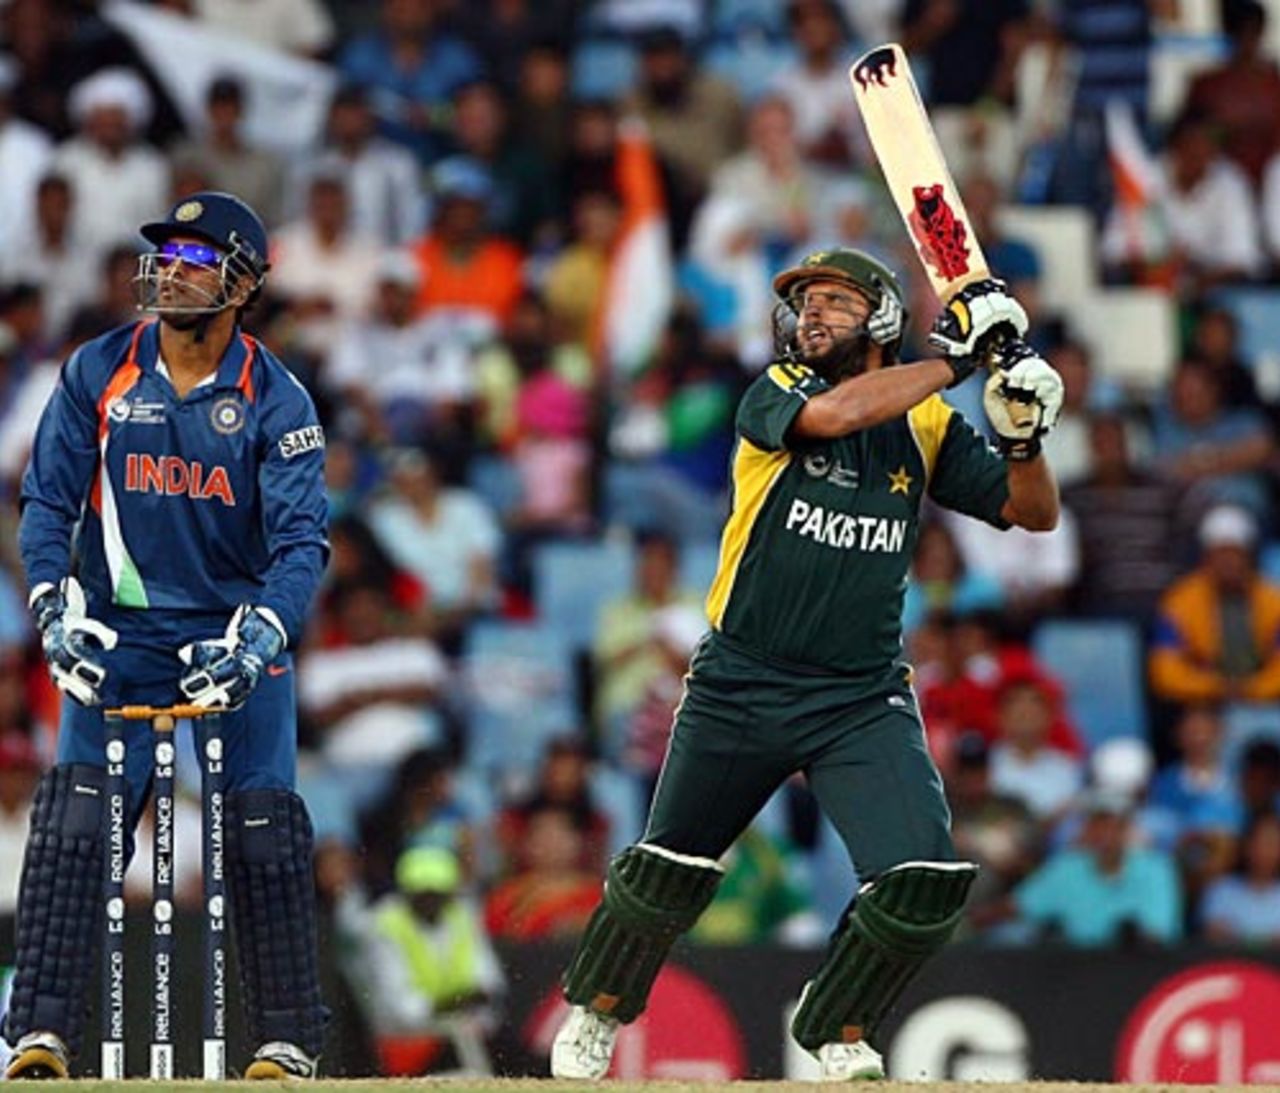 Shahid Afridi hit his first ball for four, India v Pakistan, Champions Trophy, Group A, Centurion, September 26, 2009